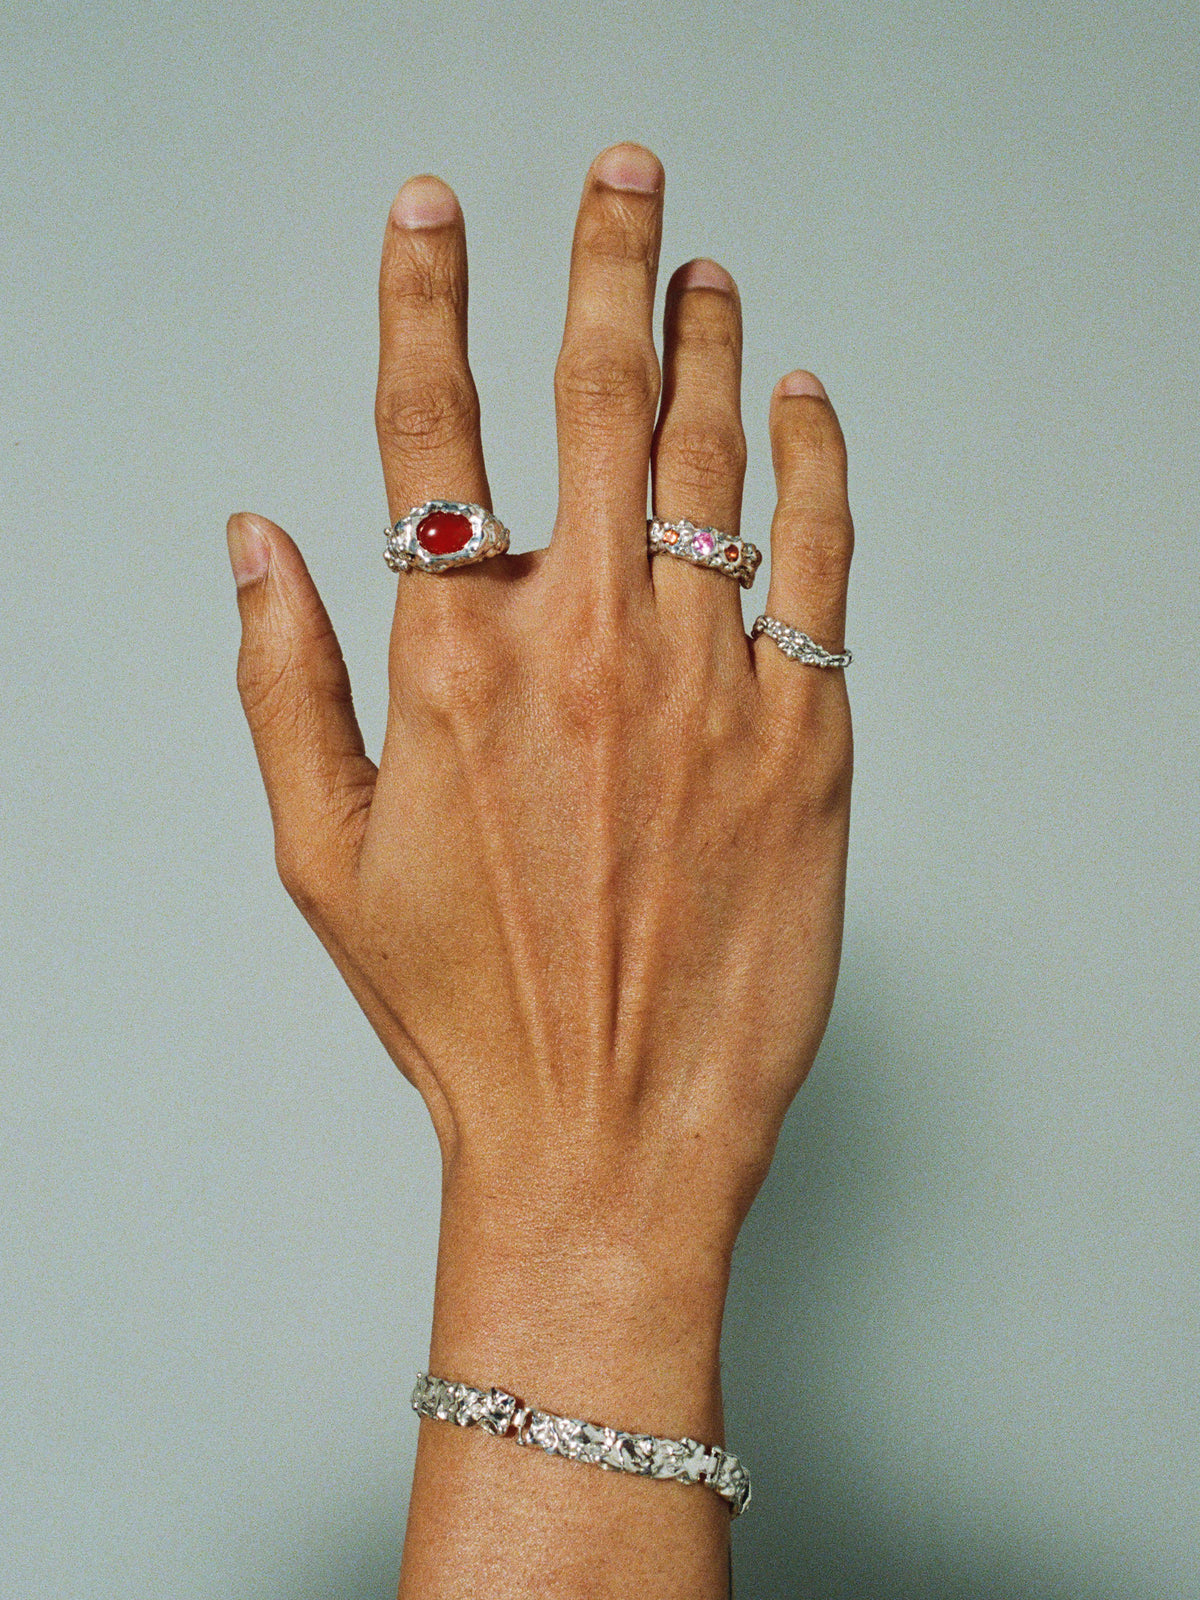 FARIS ROCA GEM Band in sterling silver with lab-created pink and orange sapphire worn on model. Styled with ROCA EYE Ring in silver with carnelian,  ROCA WAVE Ring in silver, and BRUTO Bracelet in silver